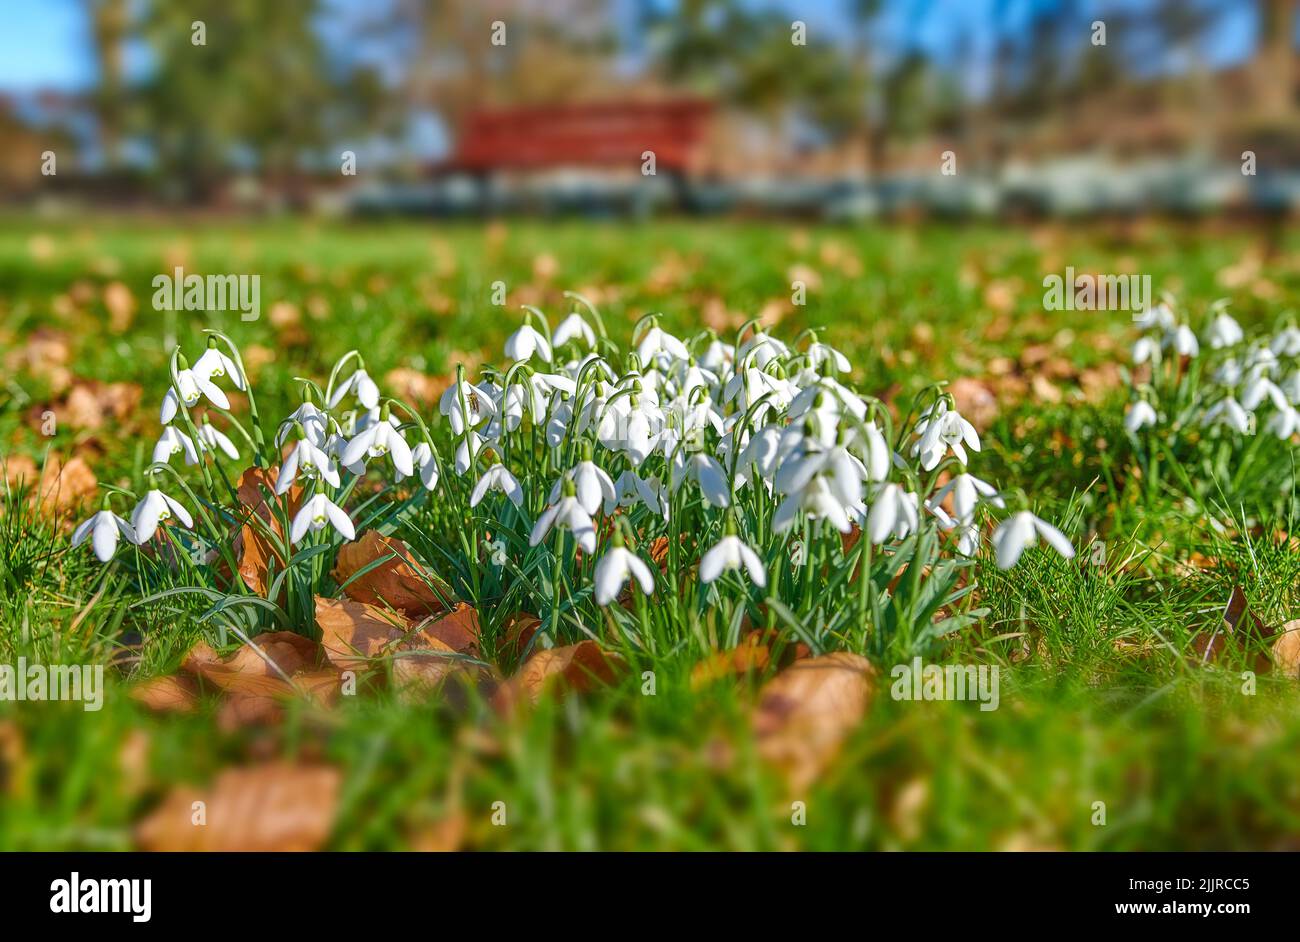 Pretty white spring flowers growing on grass or ground at an outdoor park. Closeup landscape of many common snowdrop flowering plants grow in a green Stock Photo